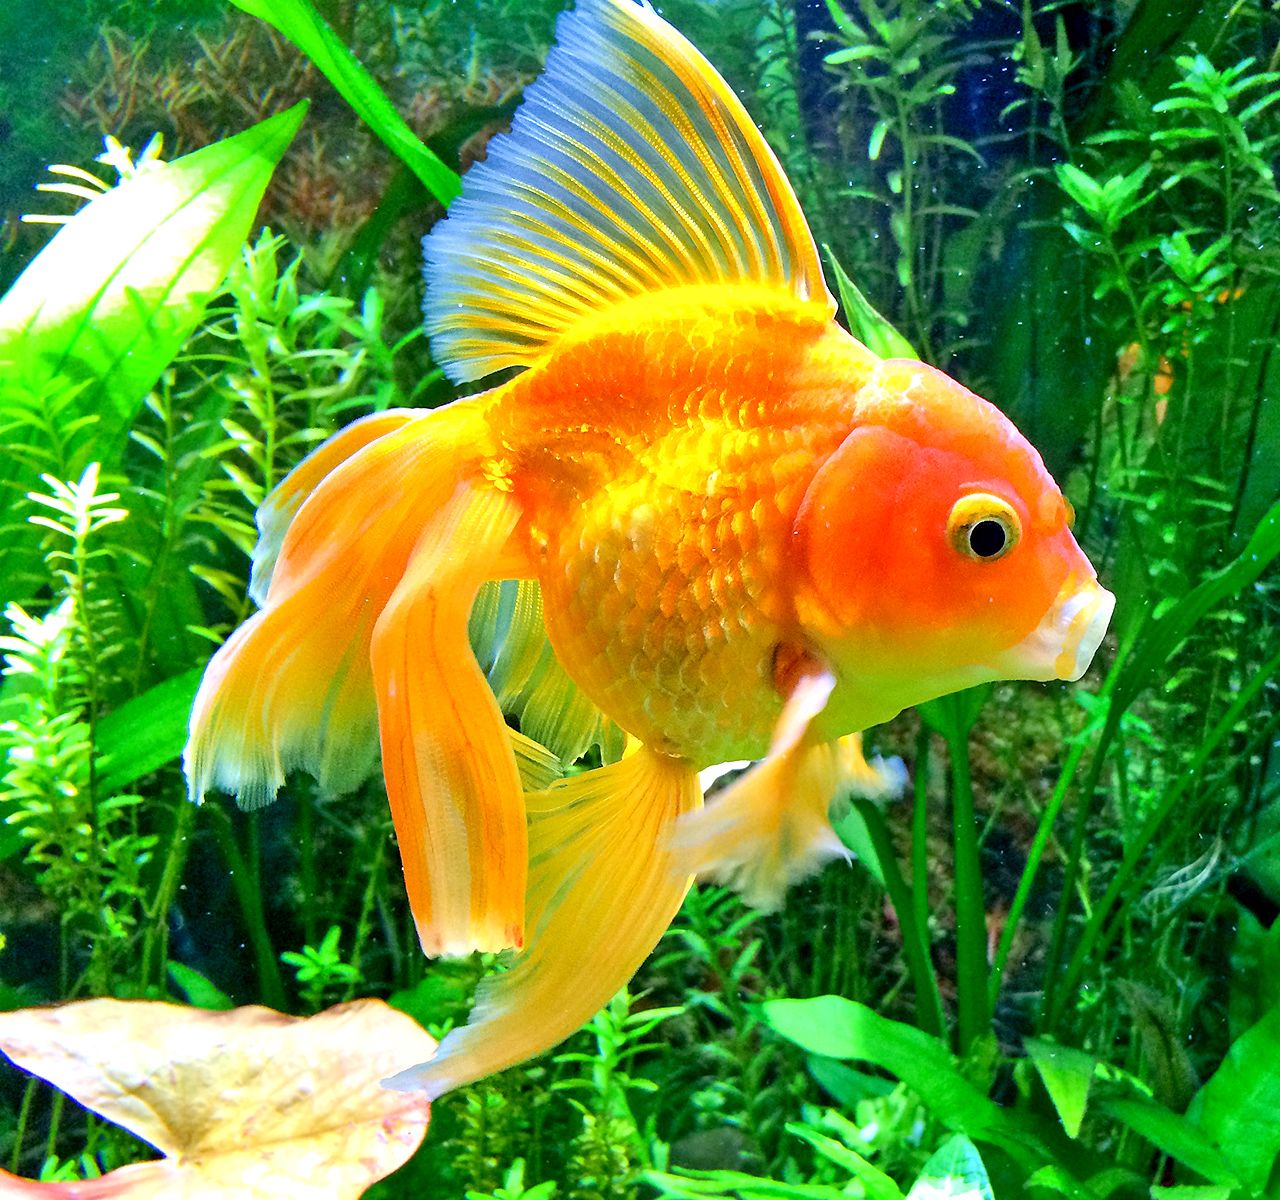 PetSmart - Need some tranquility in your life? Try a fish tank! You can  save up to 25% on select aquatic essentials for our Amazing Aquatics sale!   (photo credit: iloveminimundos)